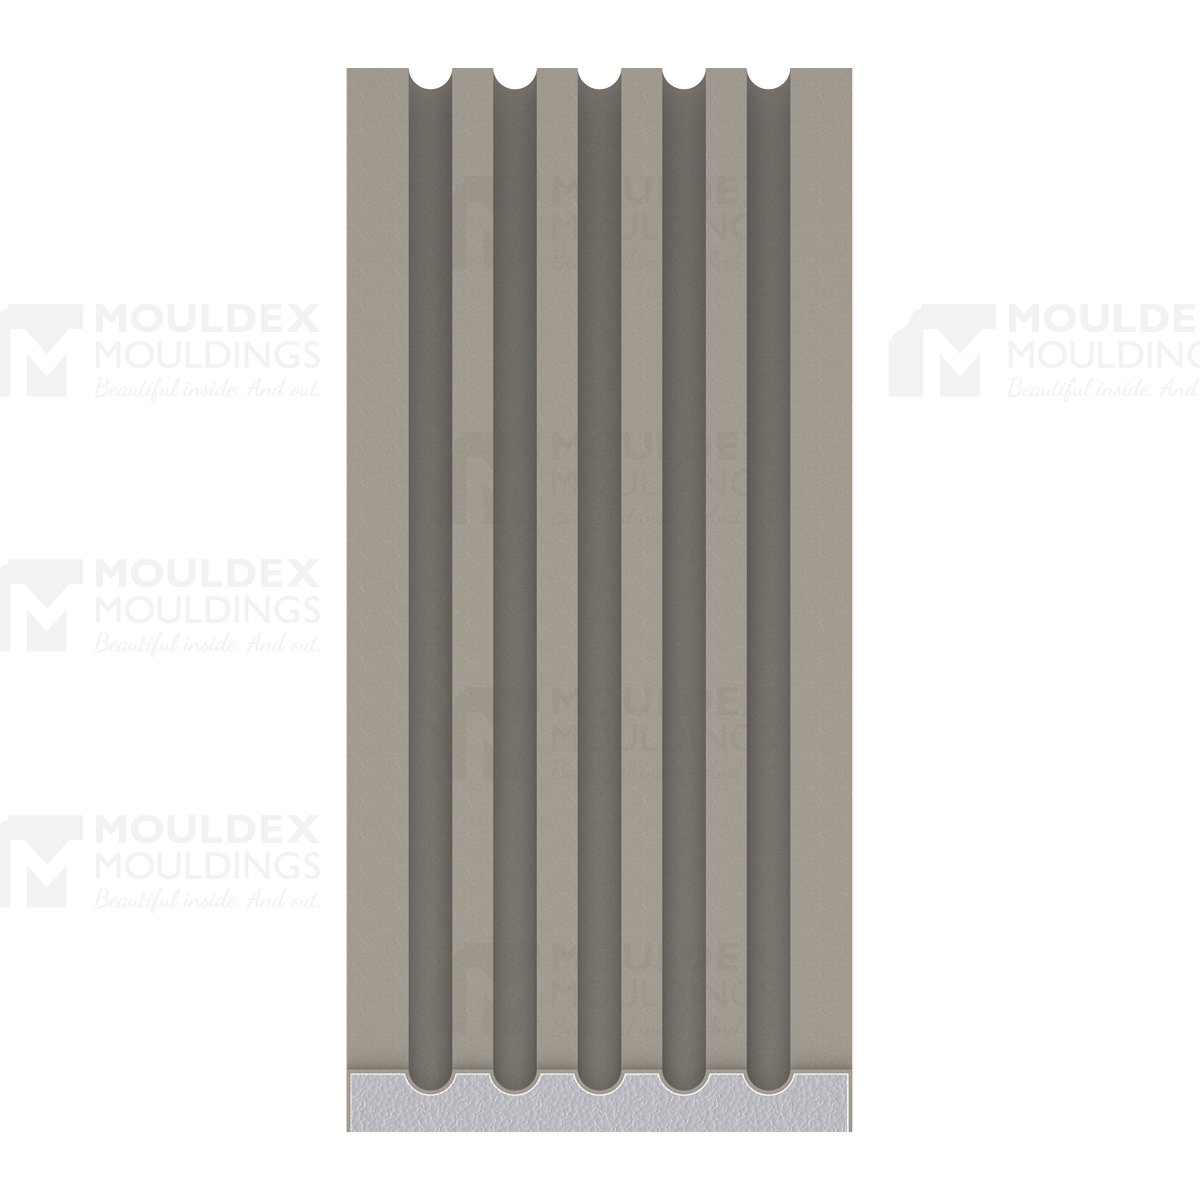 The Flute 8 Composite Exterior Fluted Pilaster